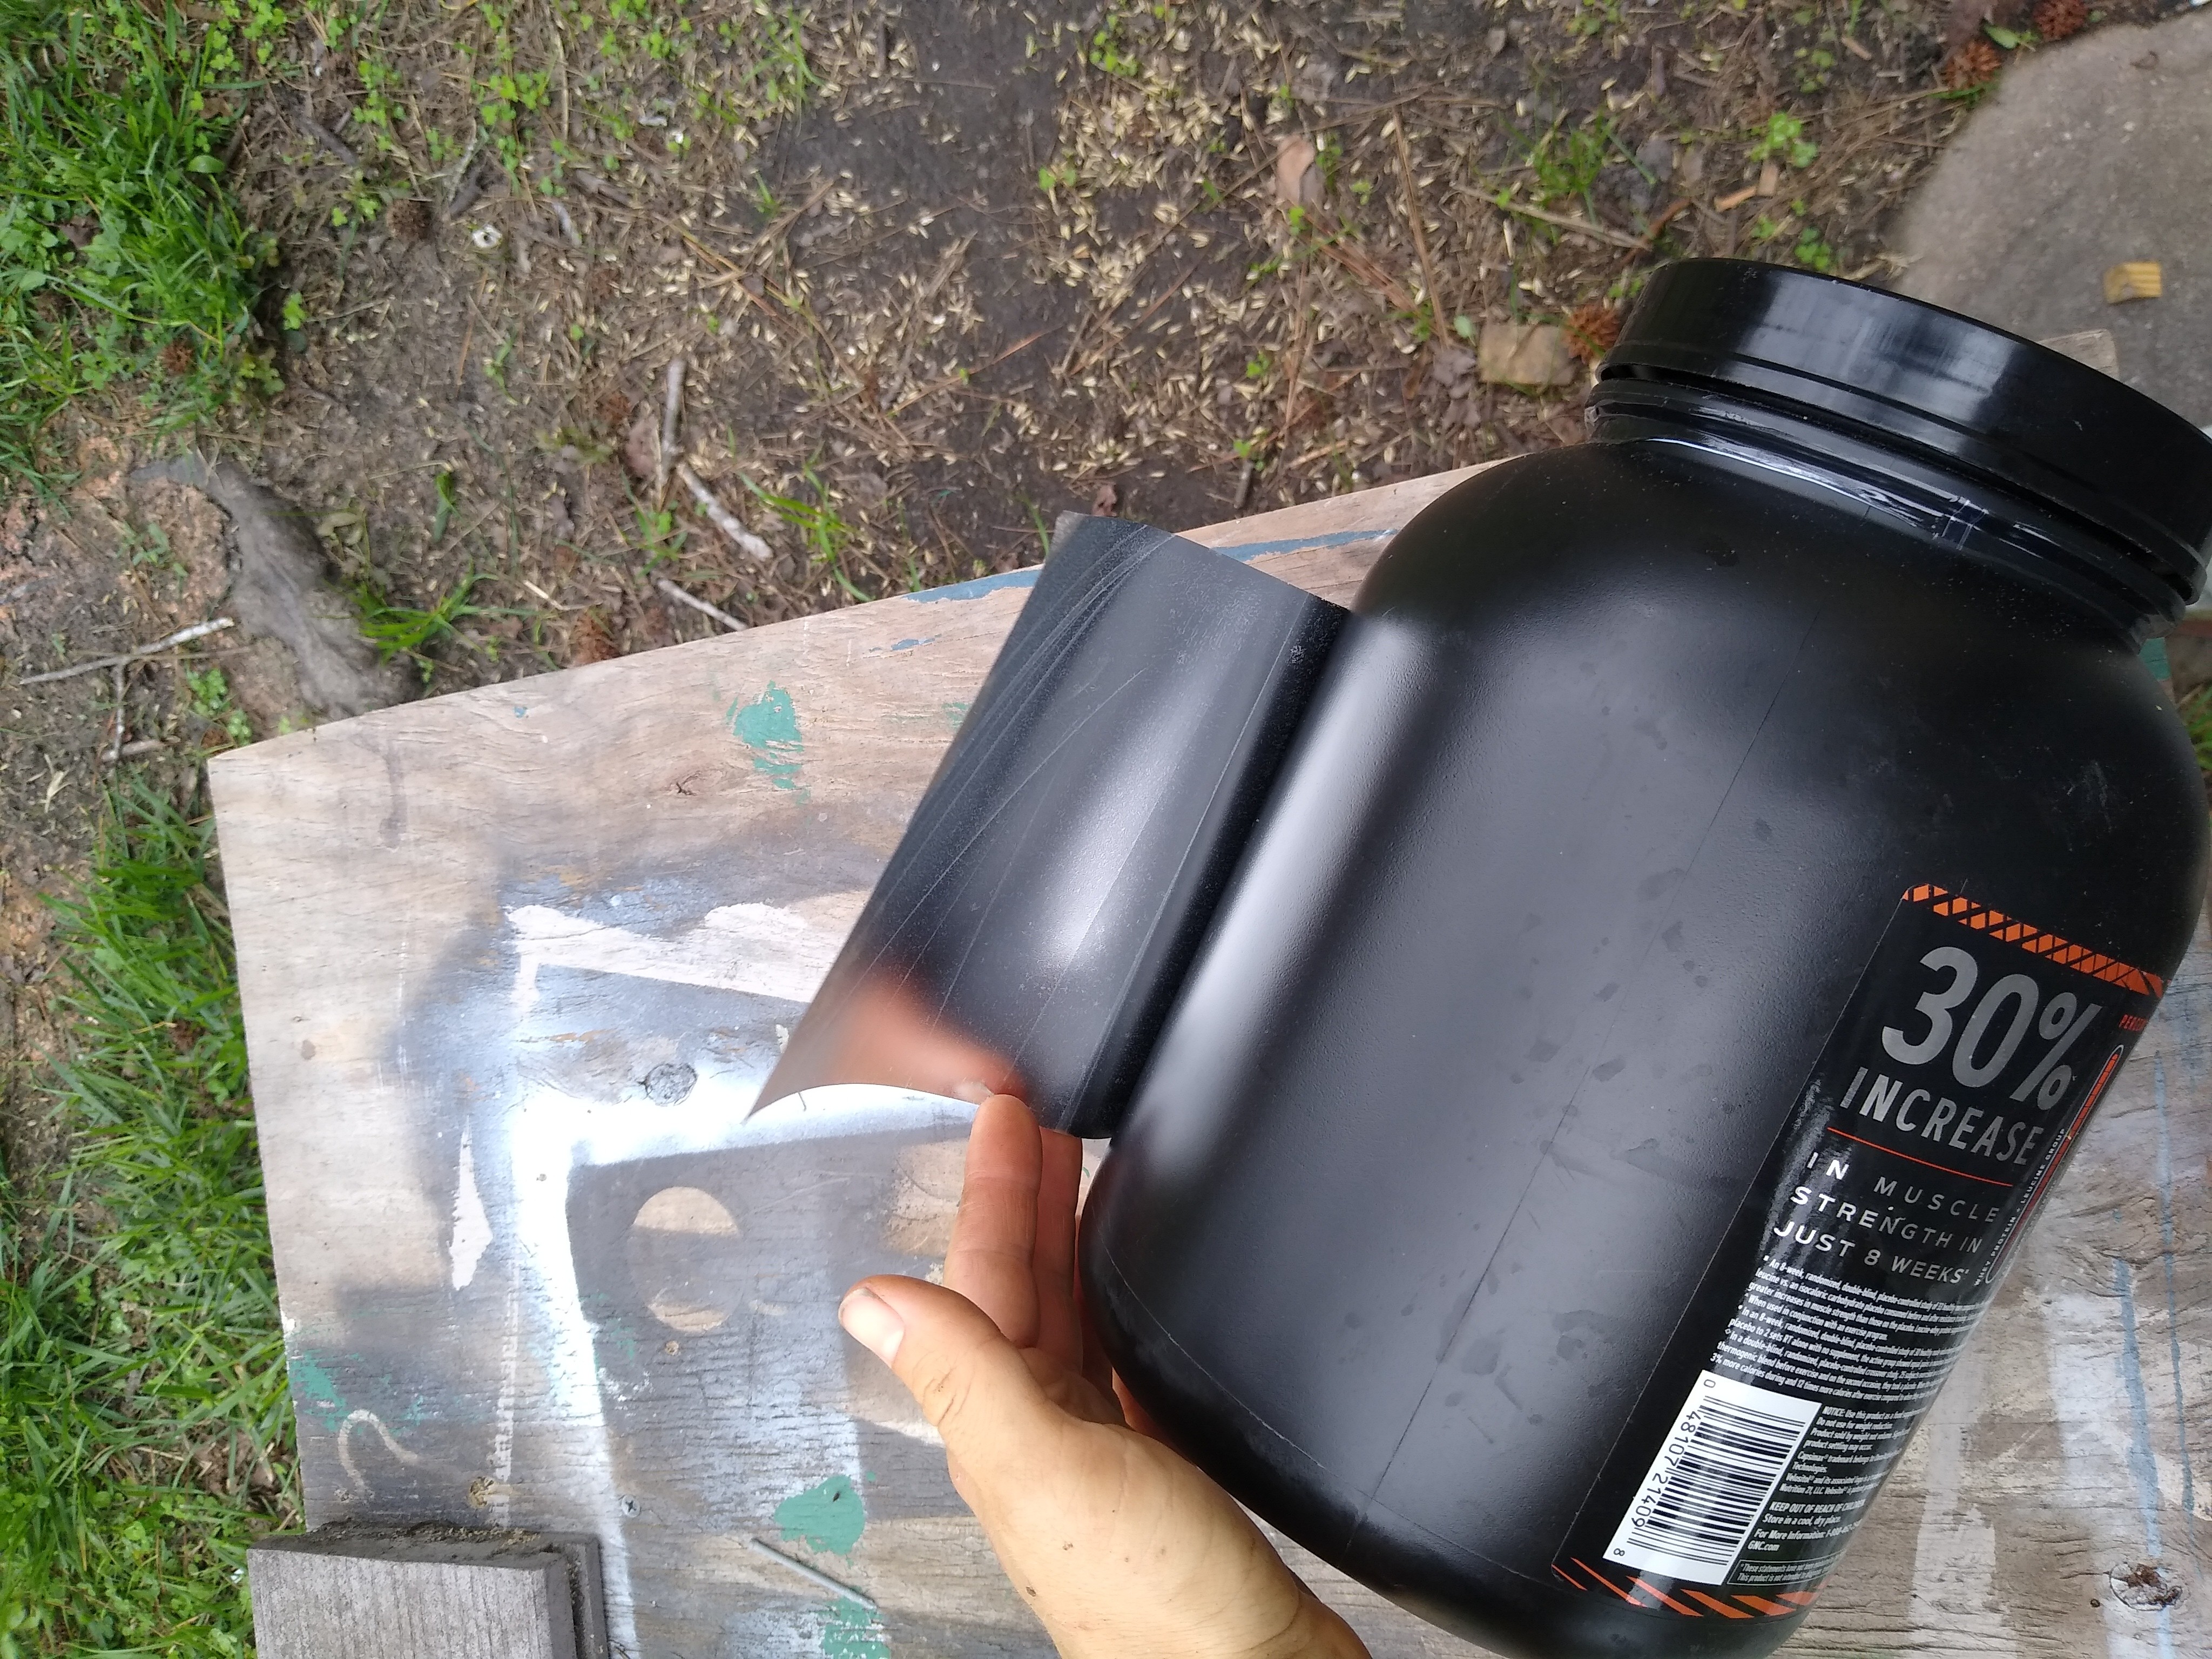 Removing label from black plastic canister. 